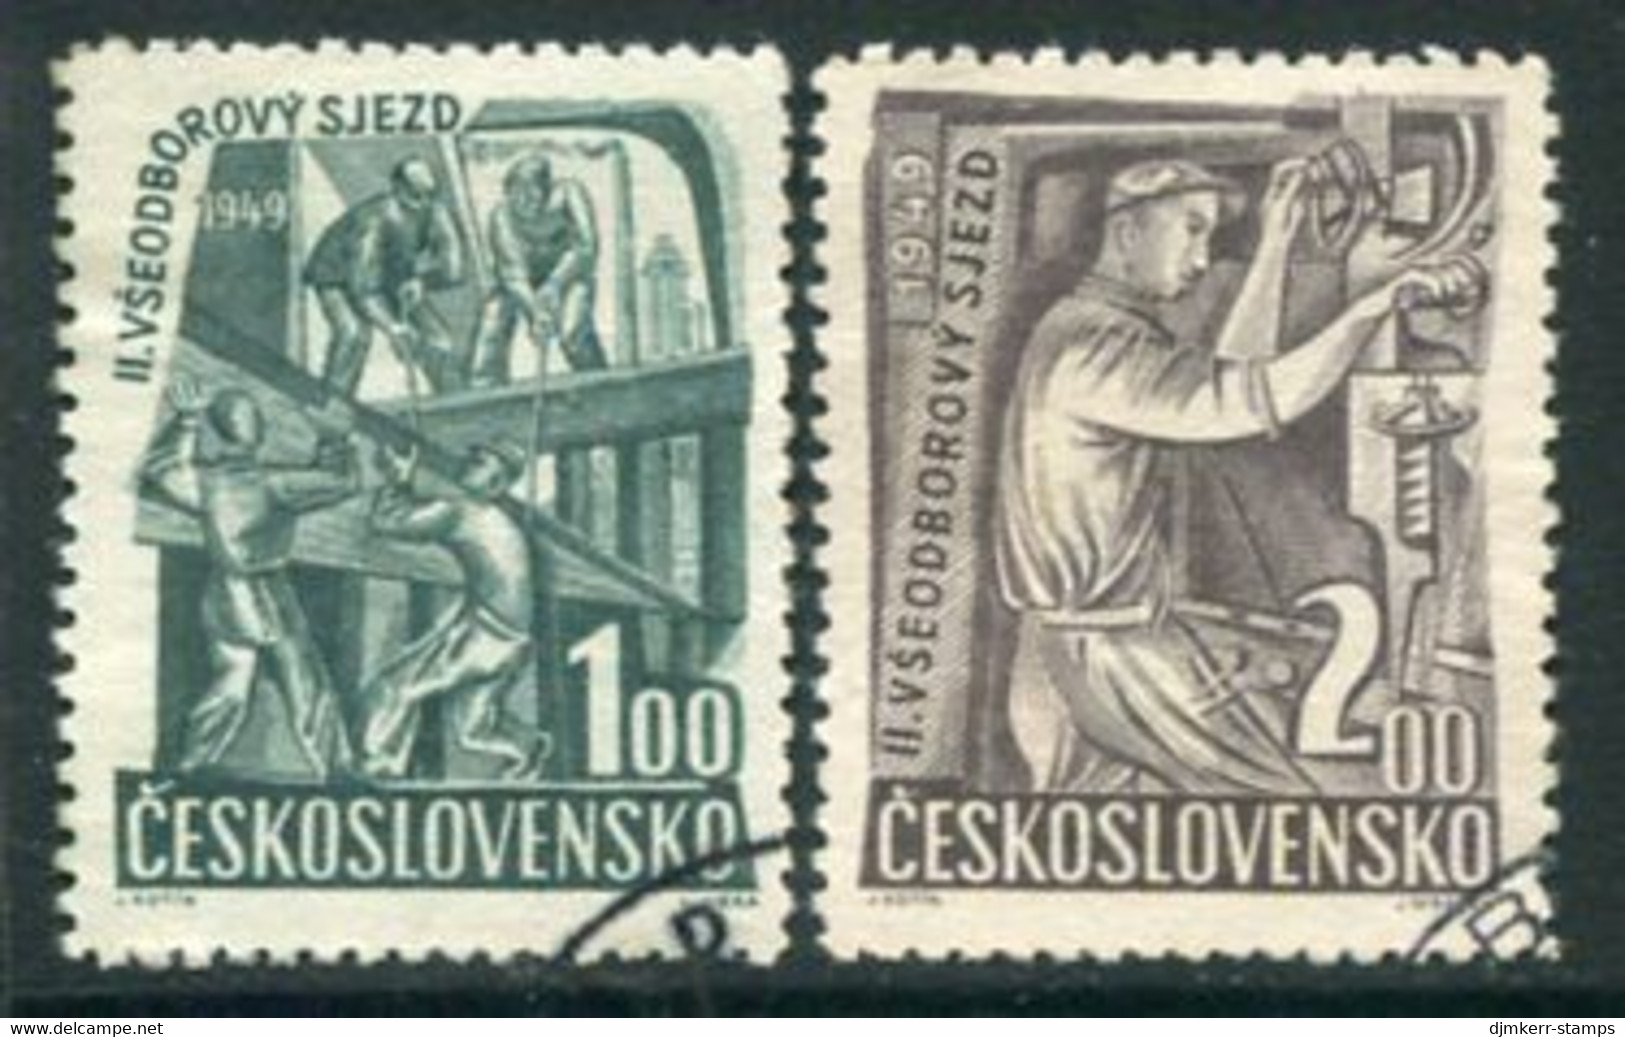 CZECHOSLOVAKIA 1949 Trades Unions Congress Used.  Michel 597-98 - Used Stamps